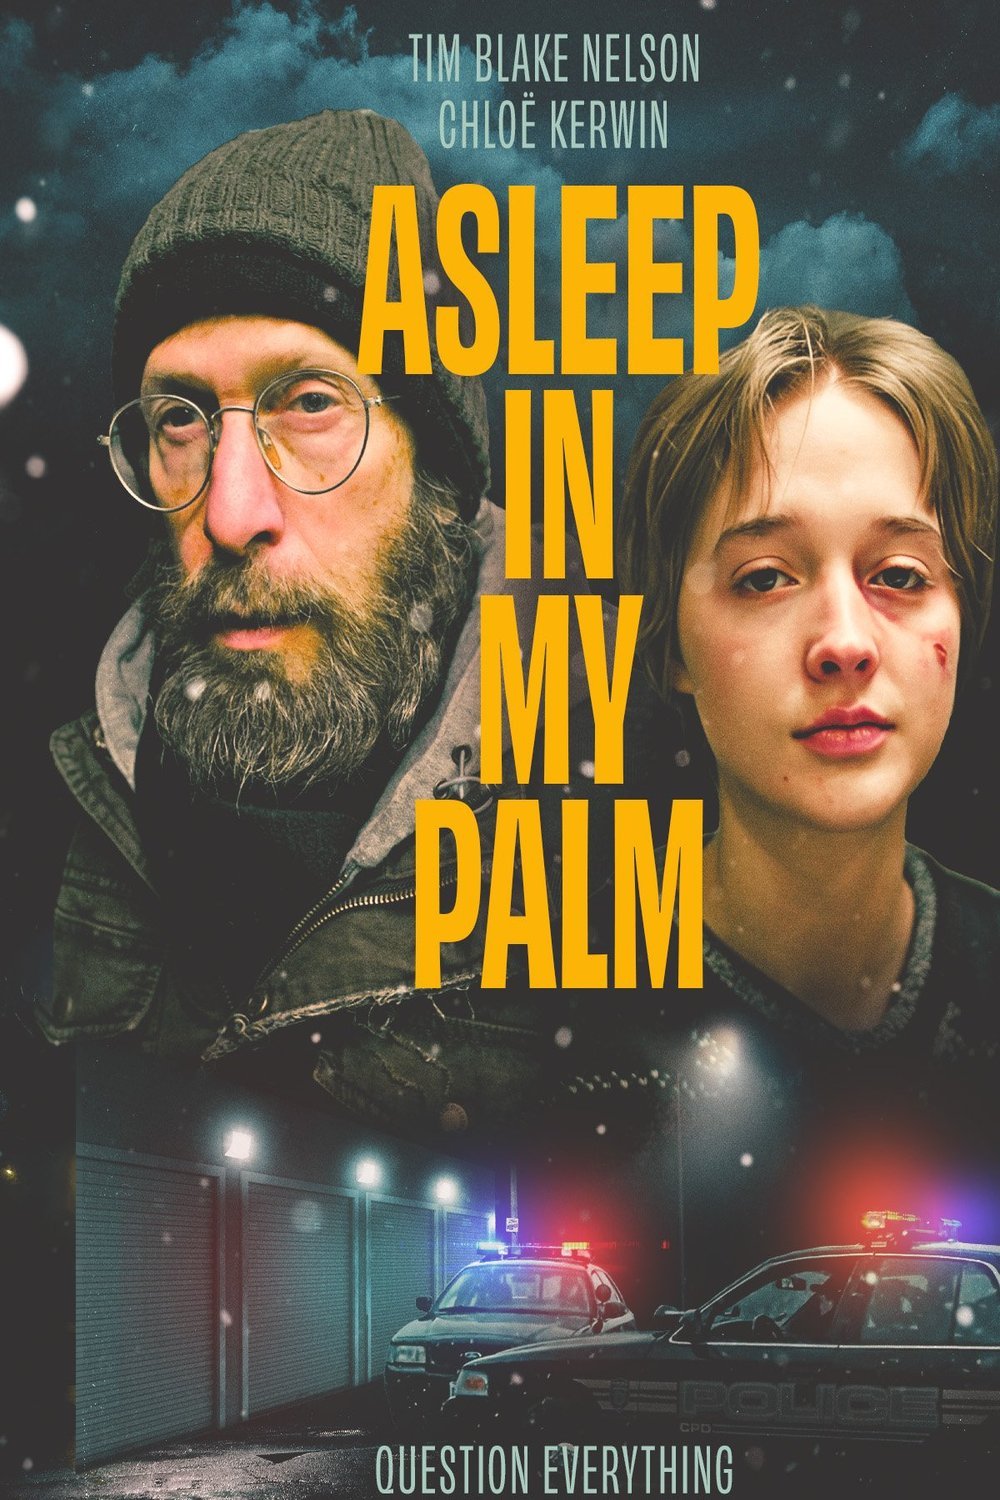 Poster of the movie Asleep in My Palm